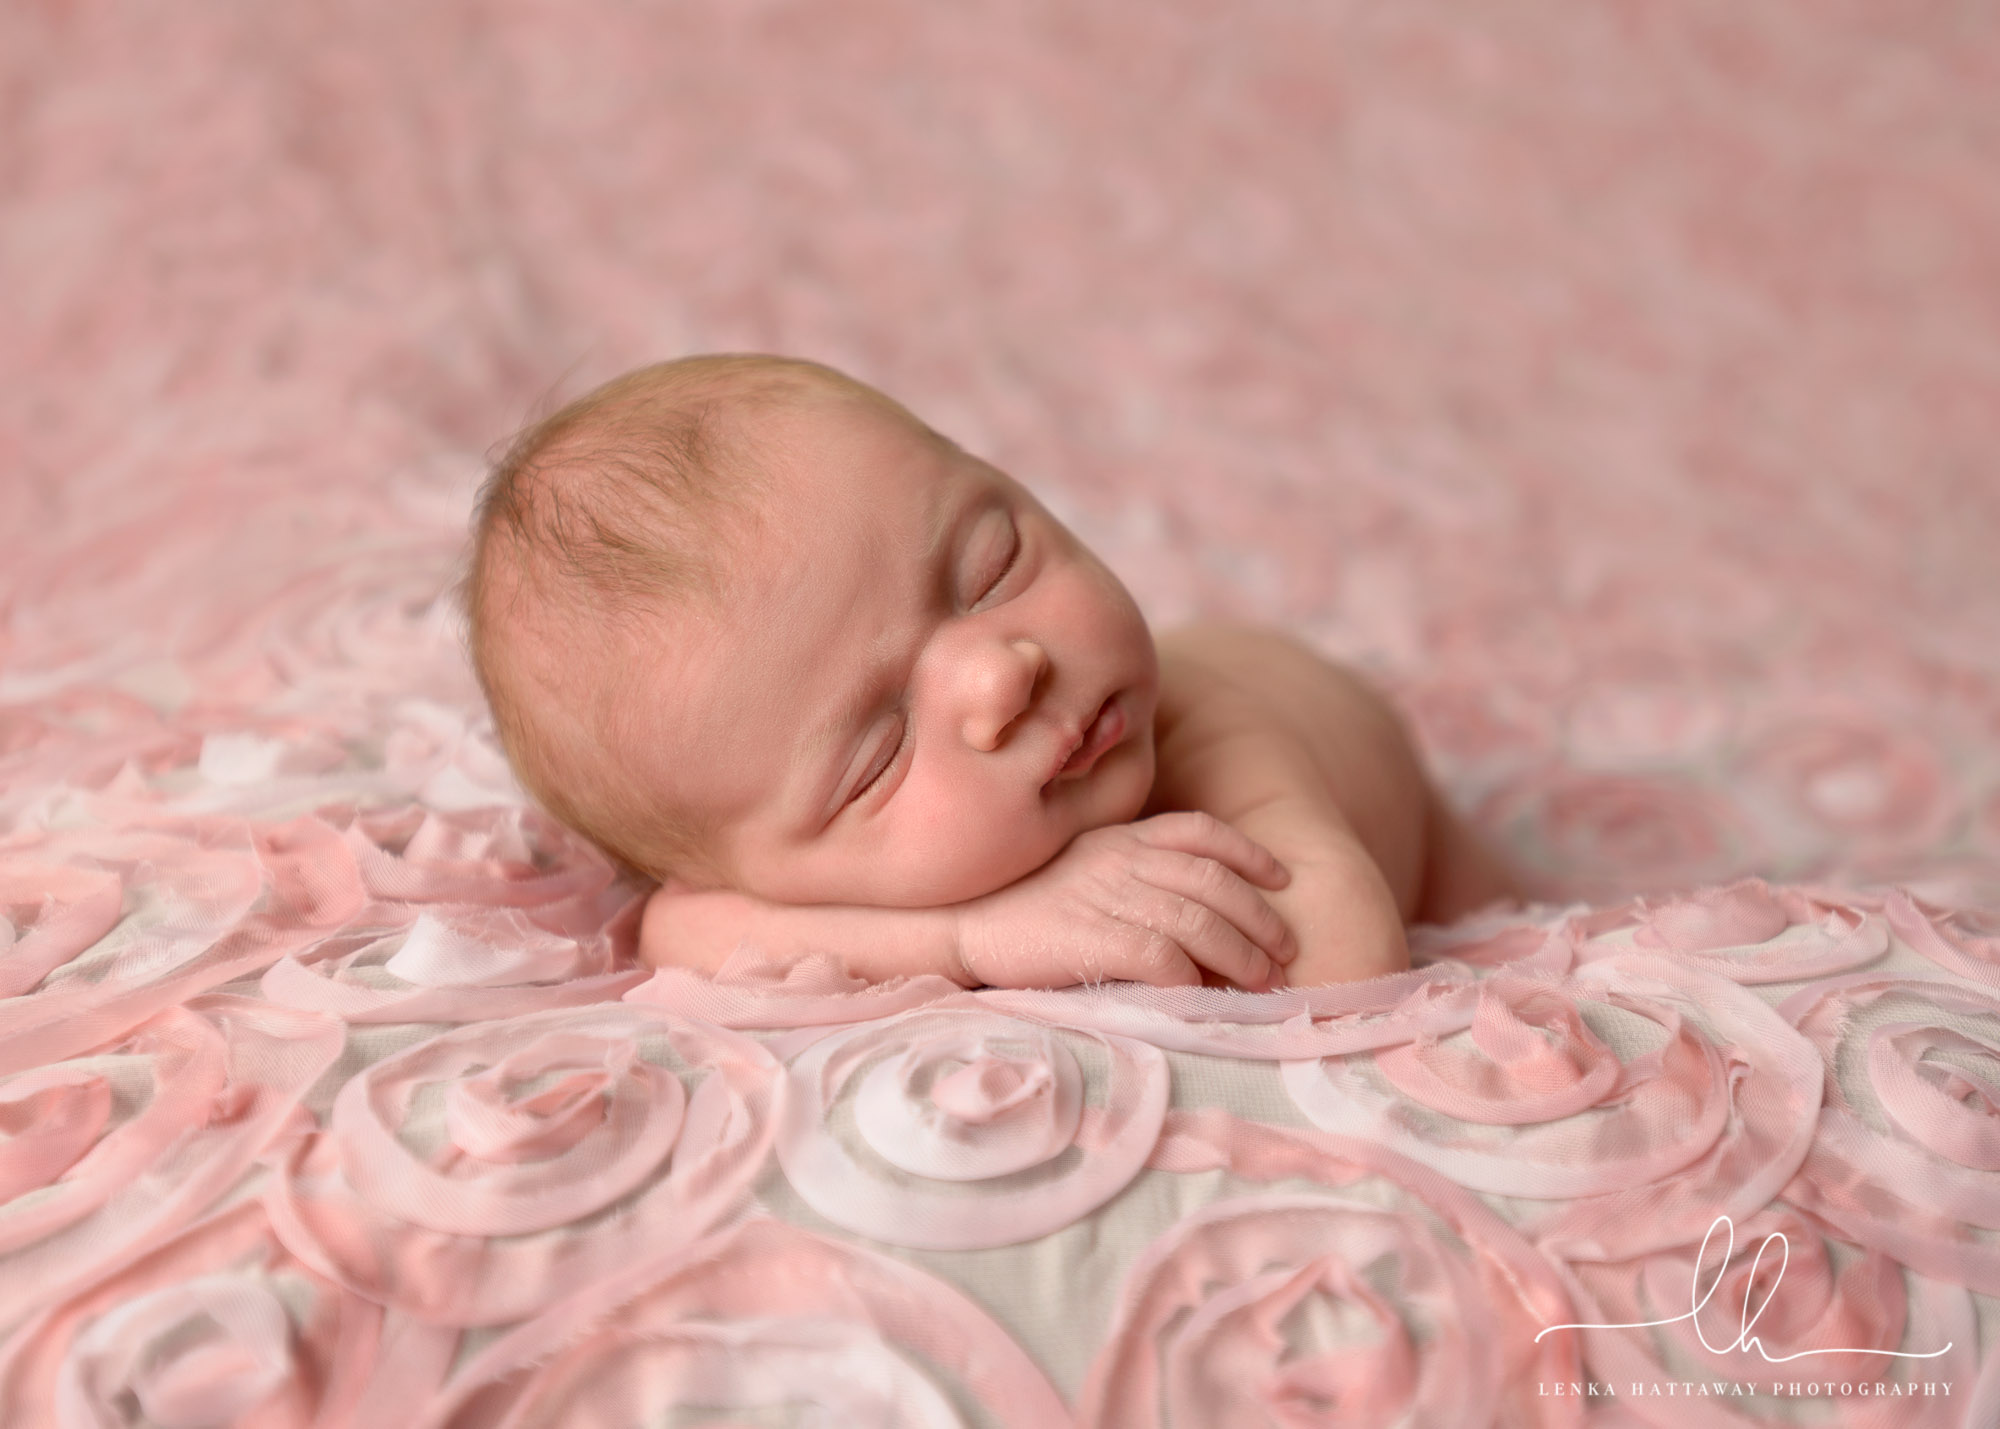 Newborn picture of a baby girl sleeping on pink flower backdrop.